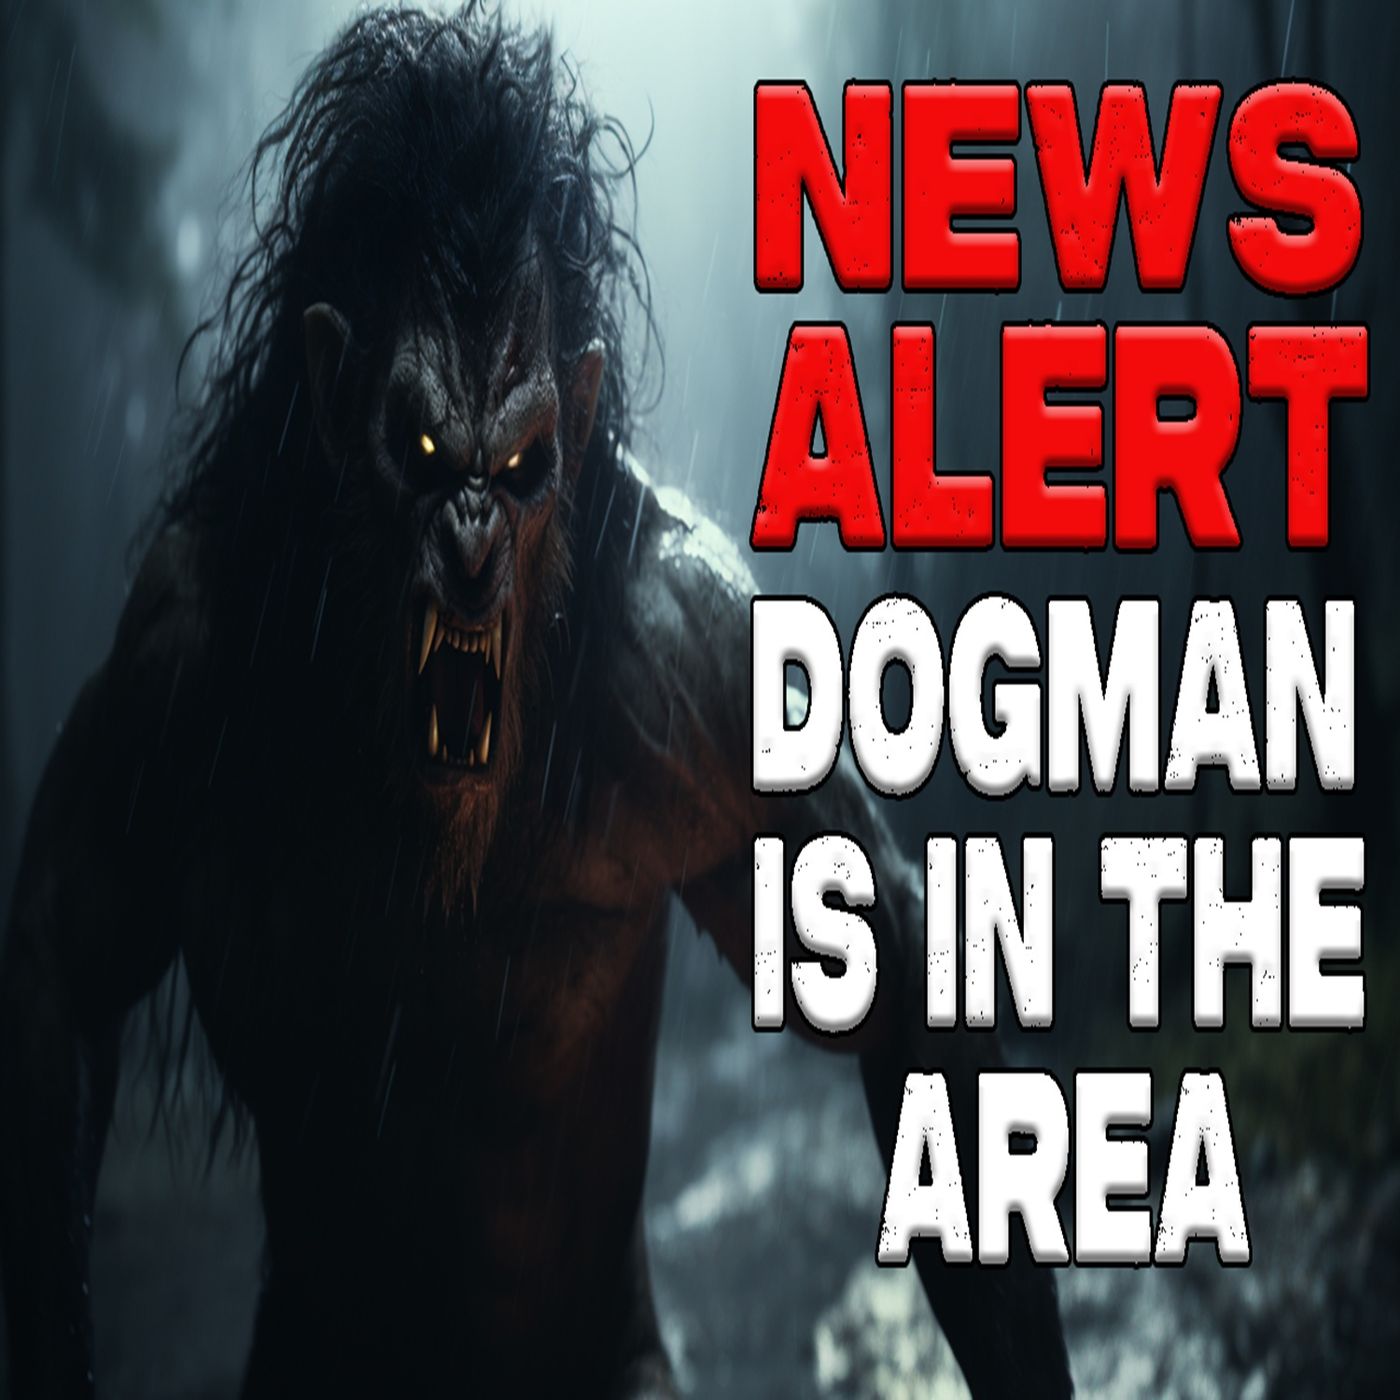 Dogman in the Area